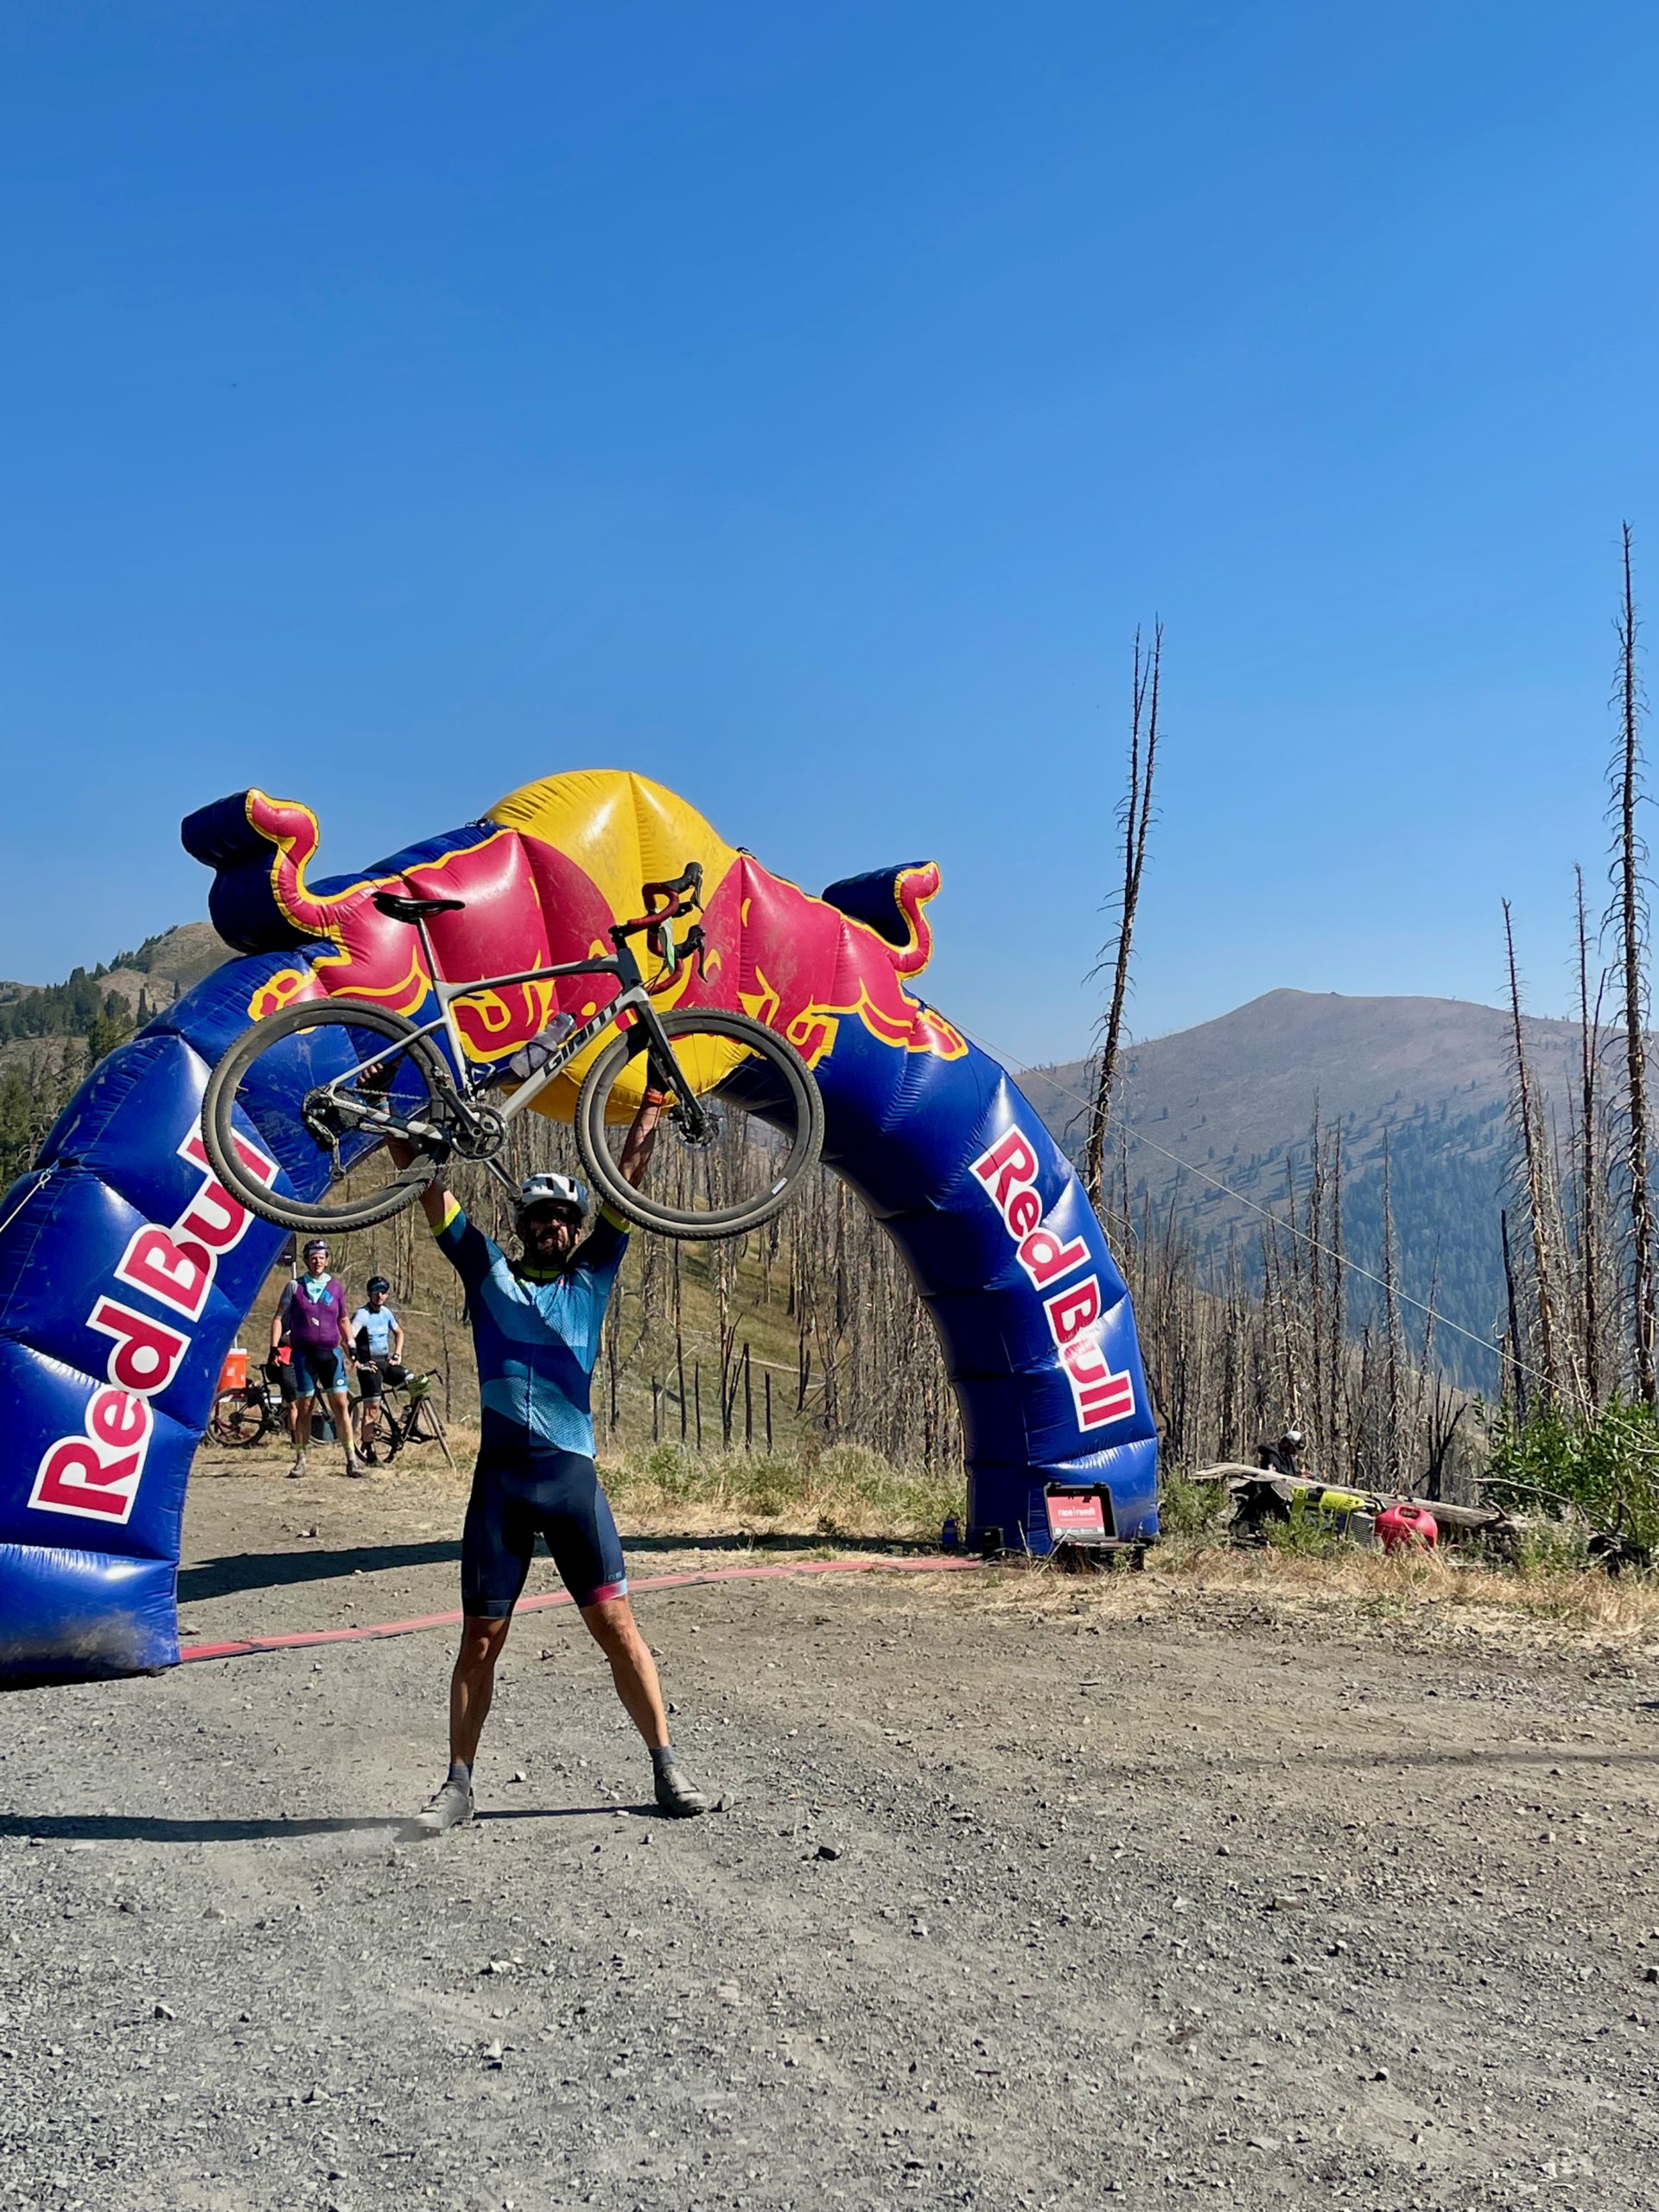 A man stands holding his bicycle over his head in front of a large Red Bull banner on a dirt road